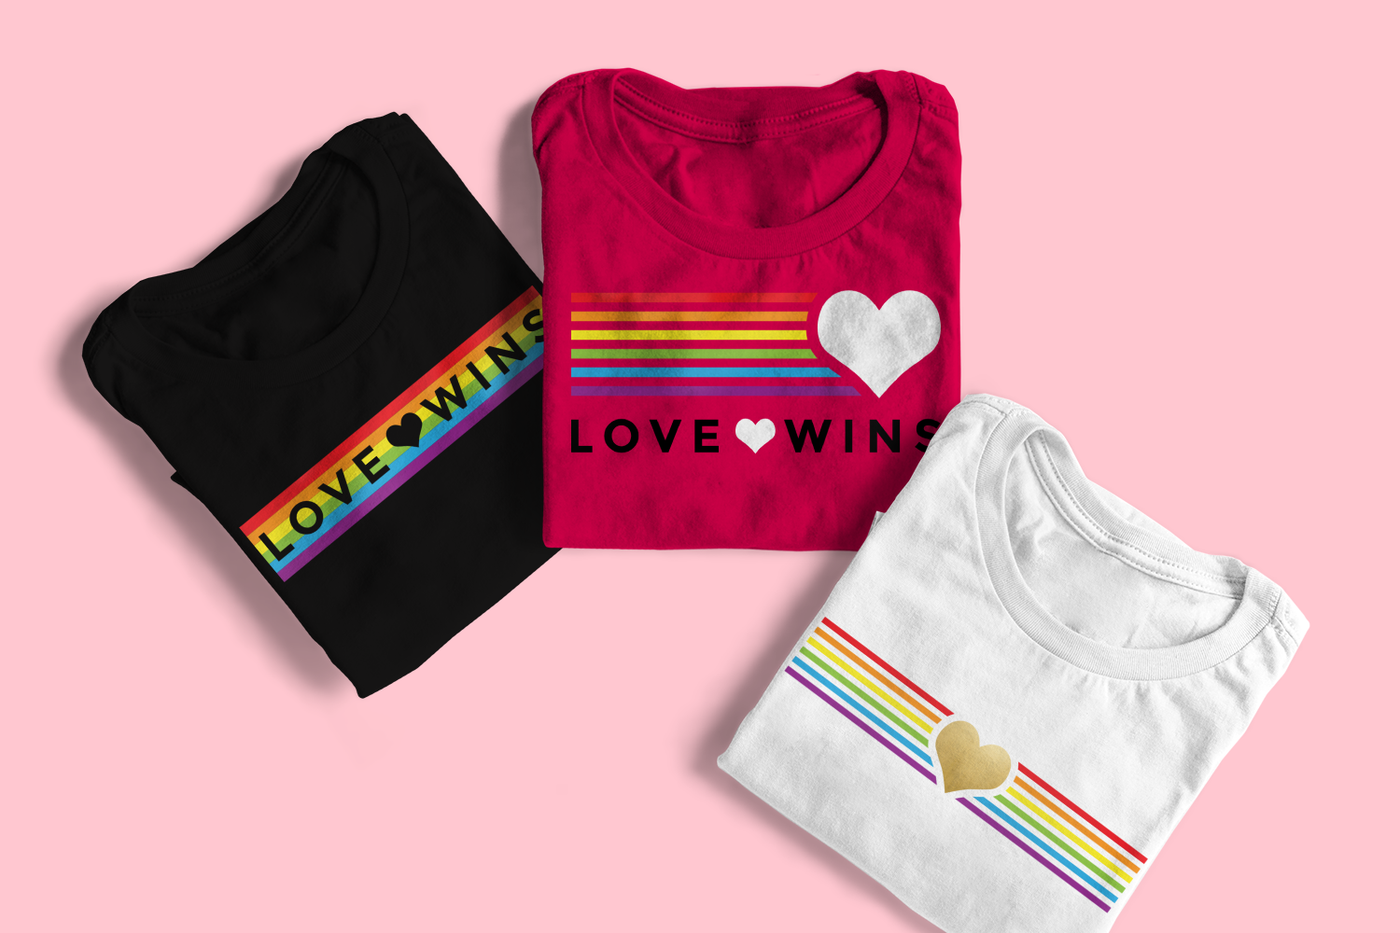 Three folded tees. The left tee has rainbow stripes with the phrase "love wins" knocked out with a heart in the middle. The middle tee has a large heart with rainbow stripes to the left of it and the phrase "love wins" below with a heart in the center of the words. The right tee has a heart in the middle with rainbow stripes to the left and right.